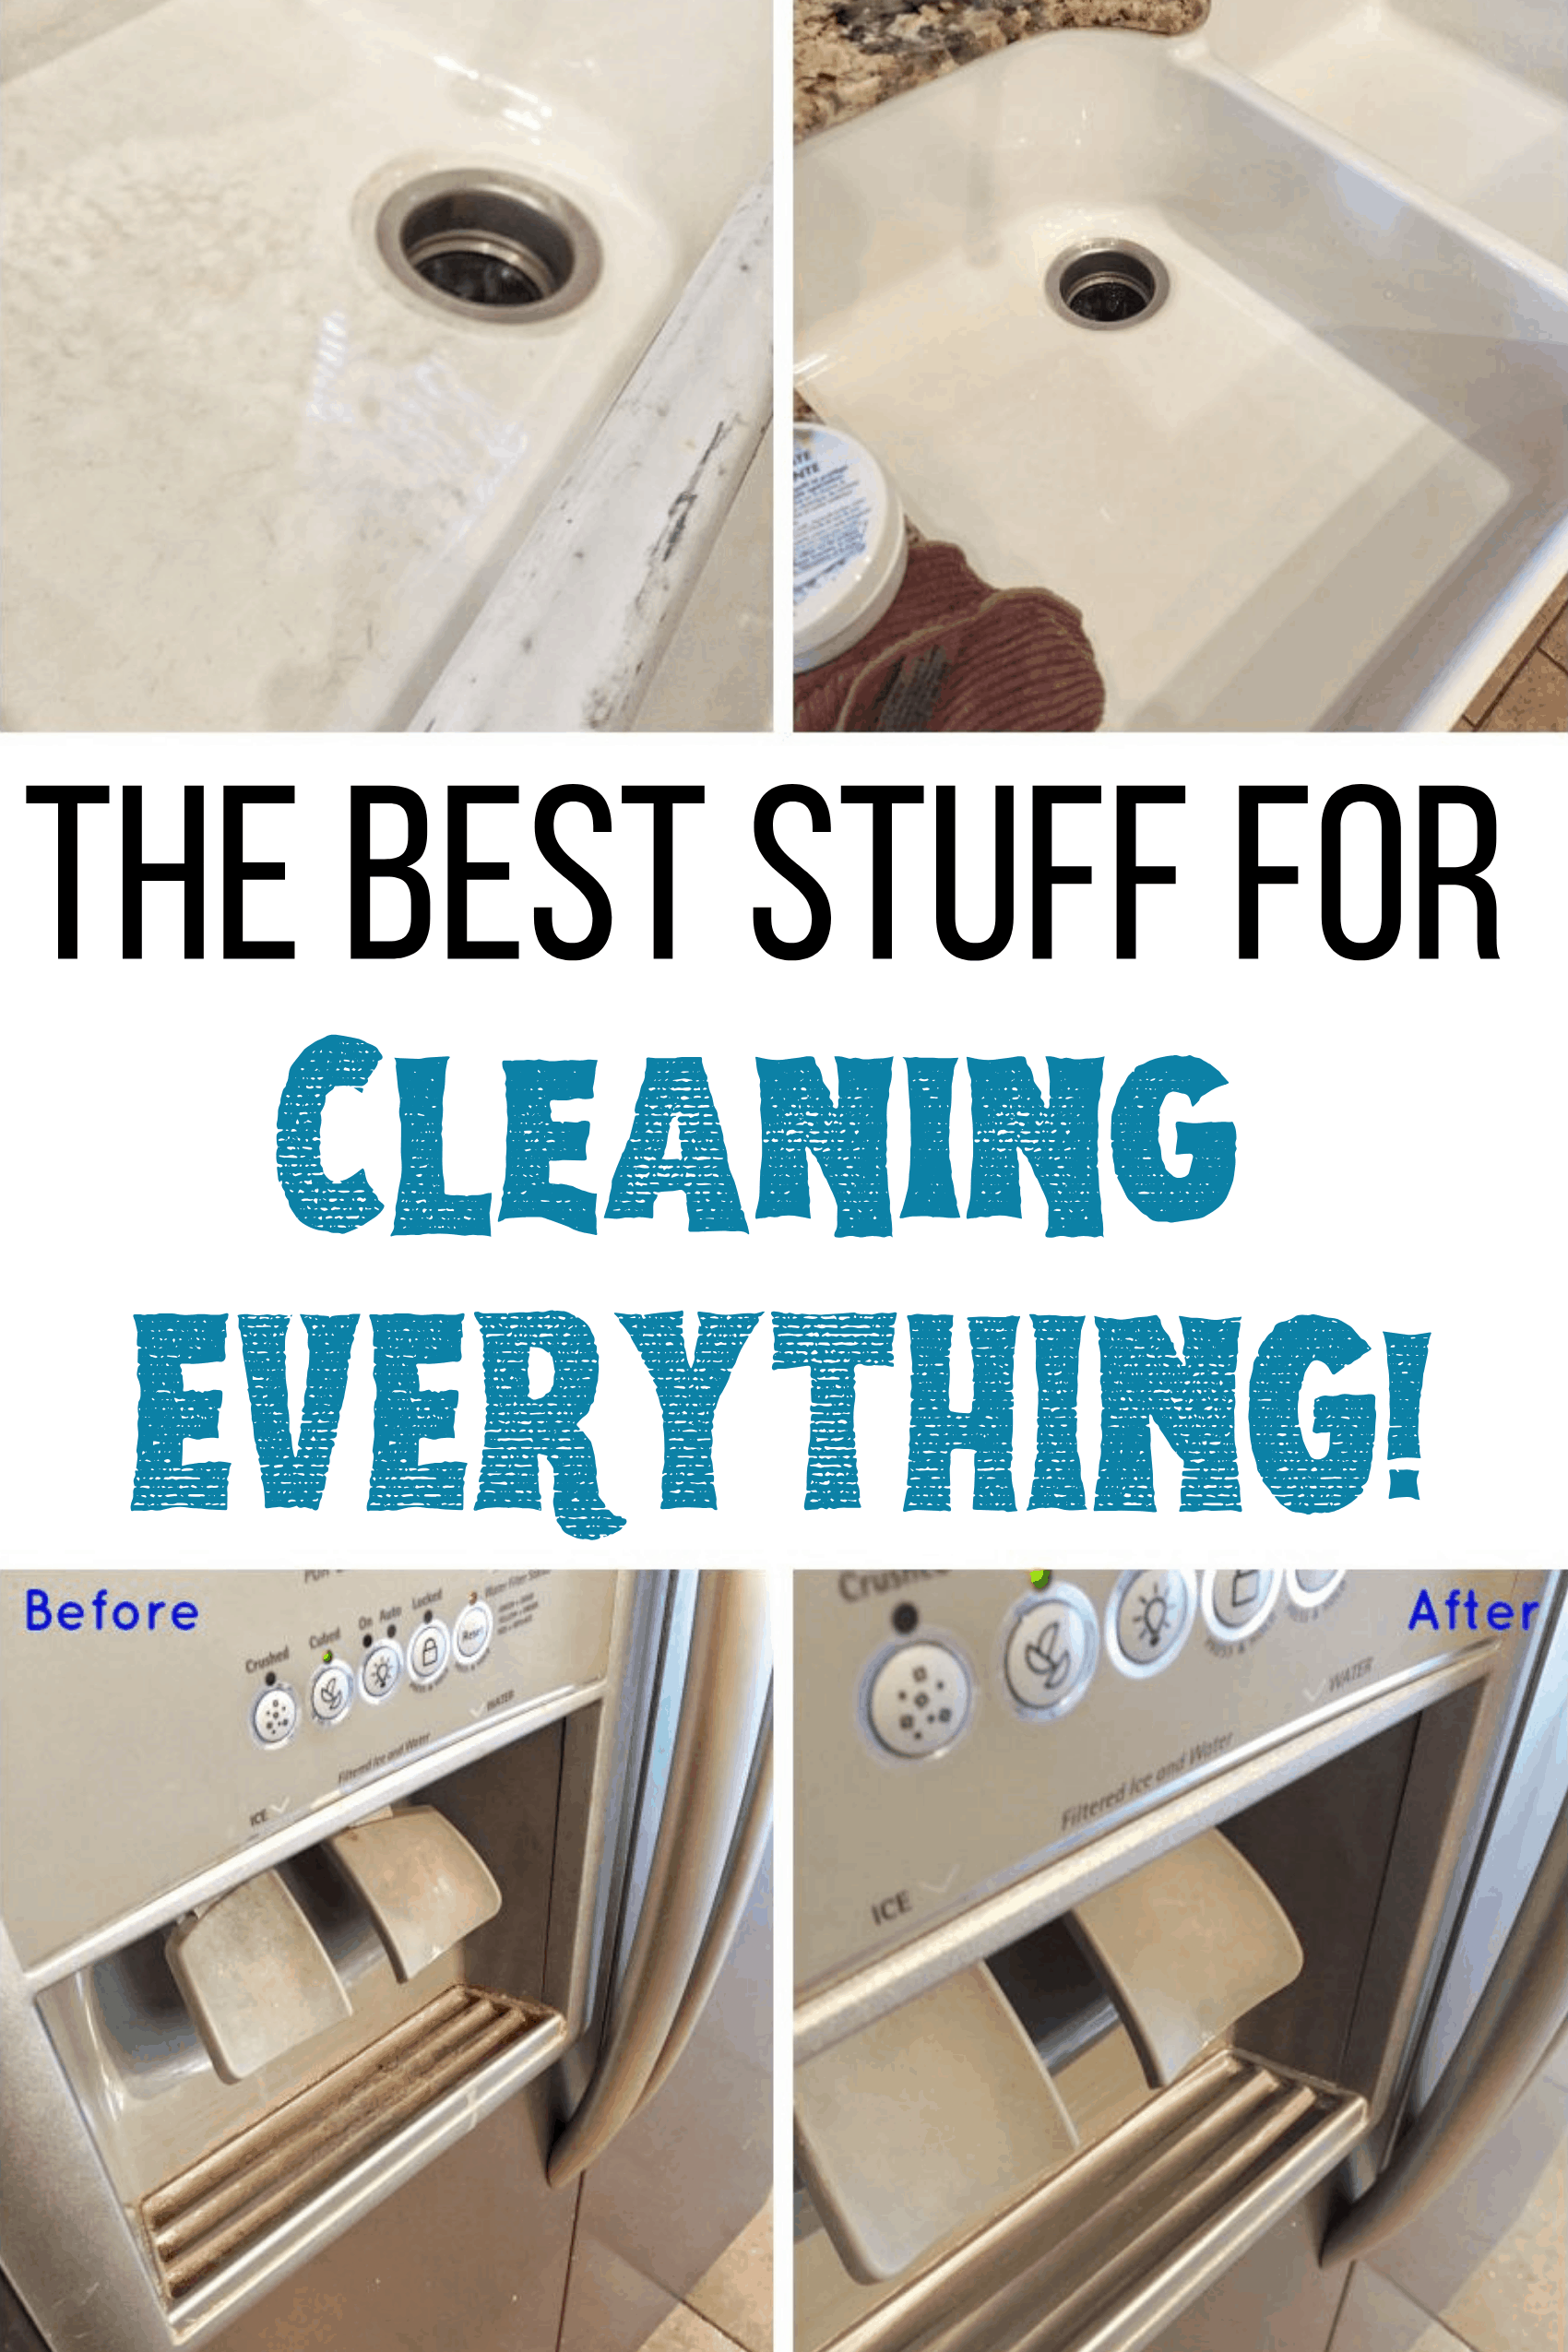 Ways to Use Norwex Cleaning Paste 35 Ideas You Need to Know!